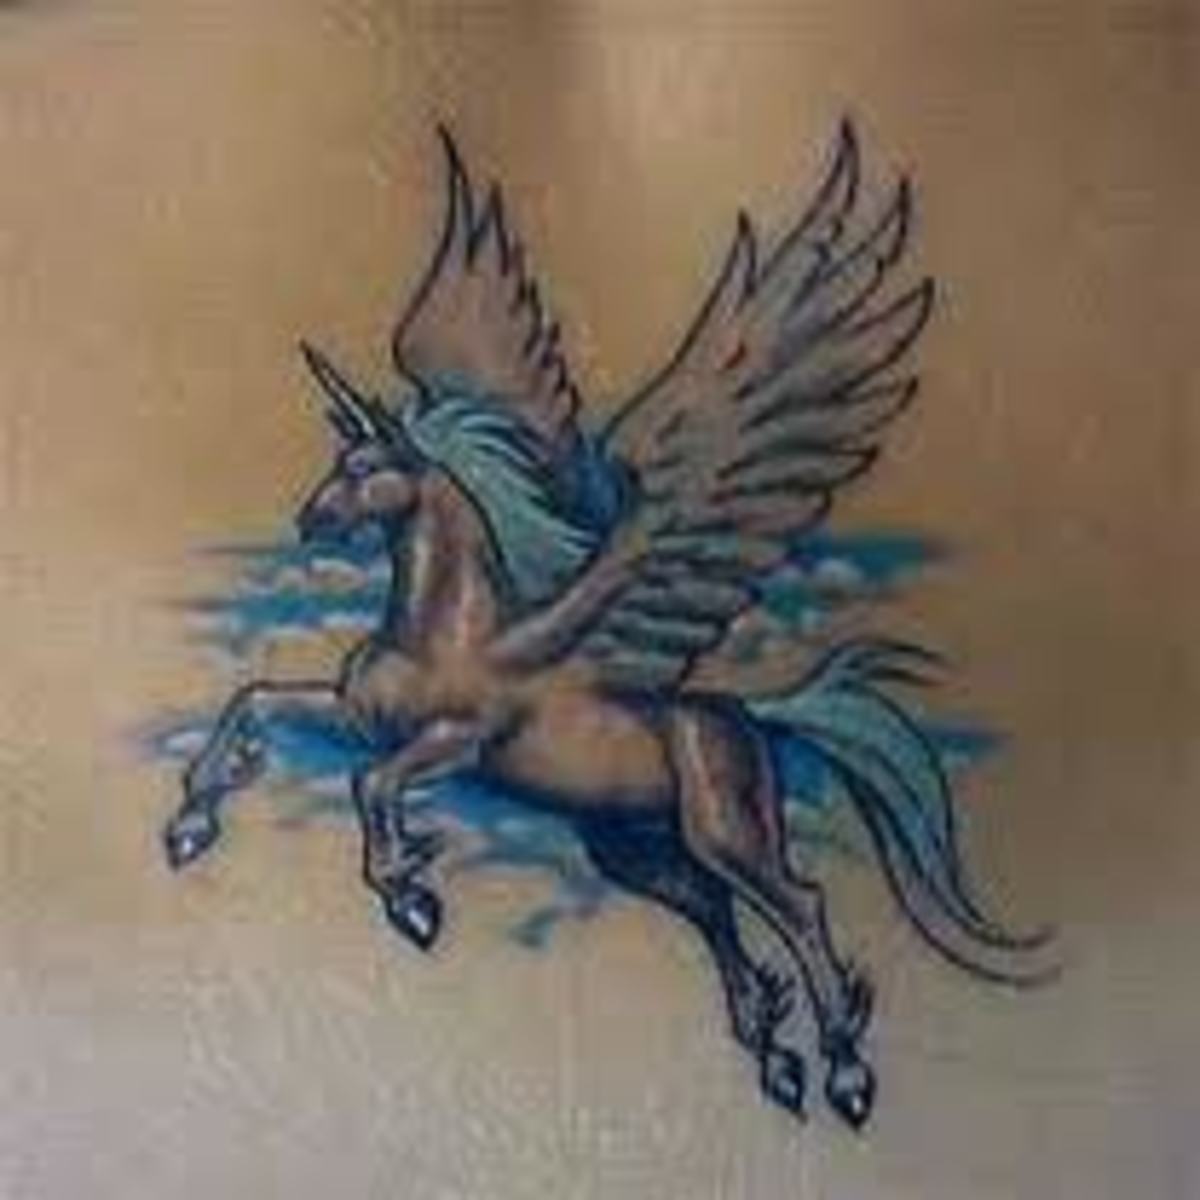 unicorn-tattoos-and-meanings